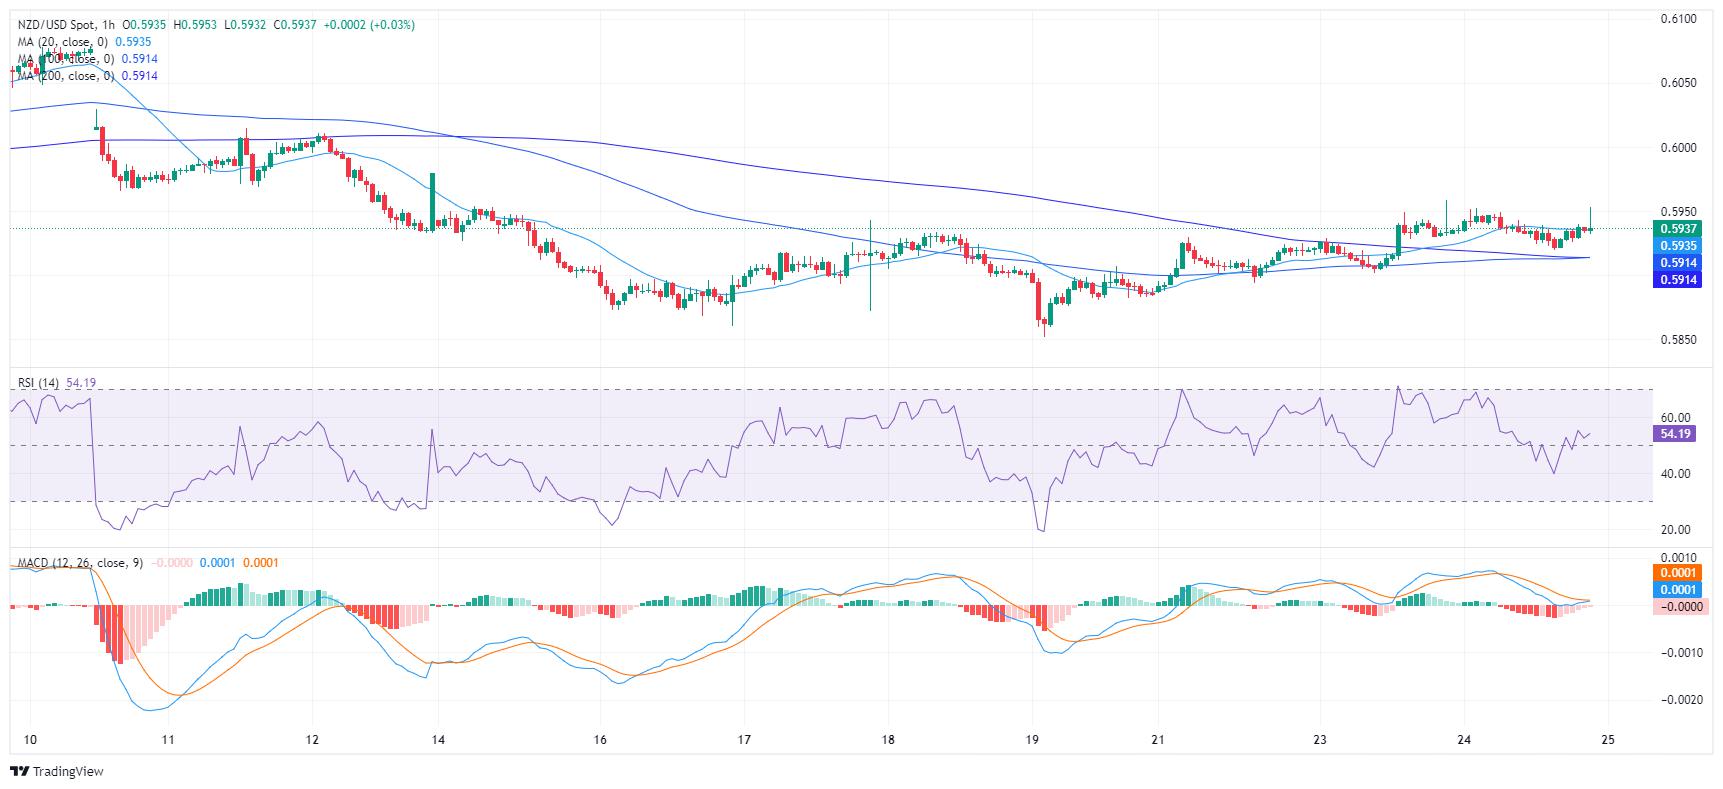 NZD/USD Price Analysis: Bearish forces persist, bulls challenged the 20-day SMA